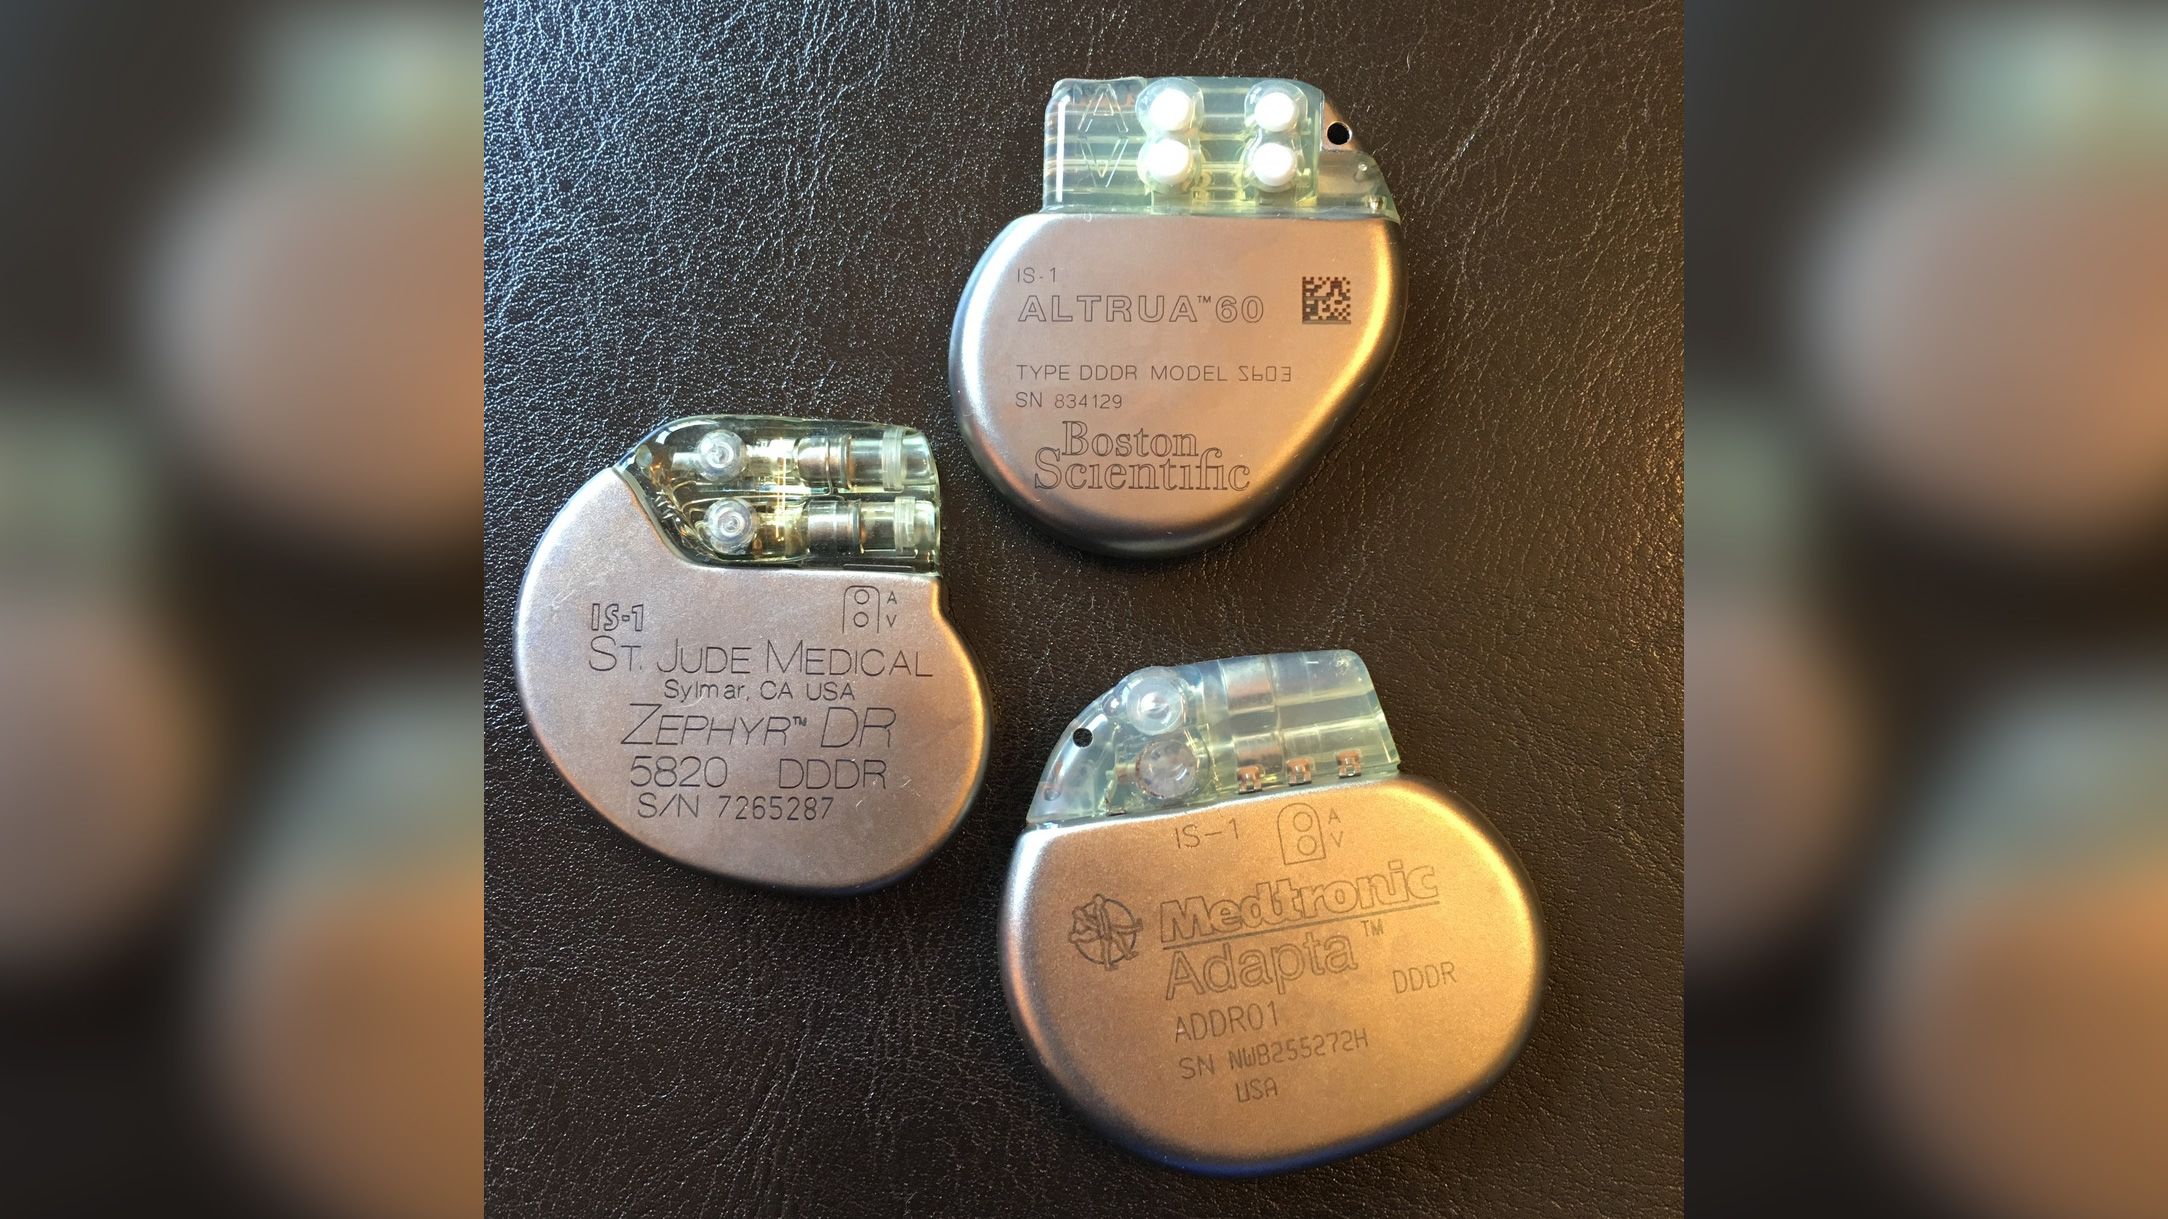 Pacemaker Padding -  Canada